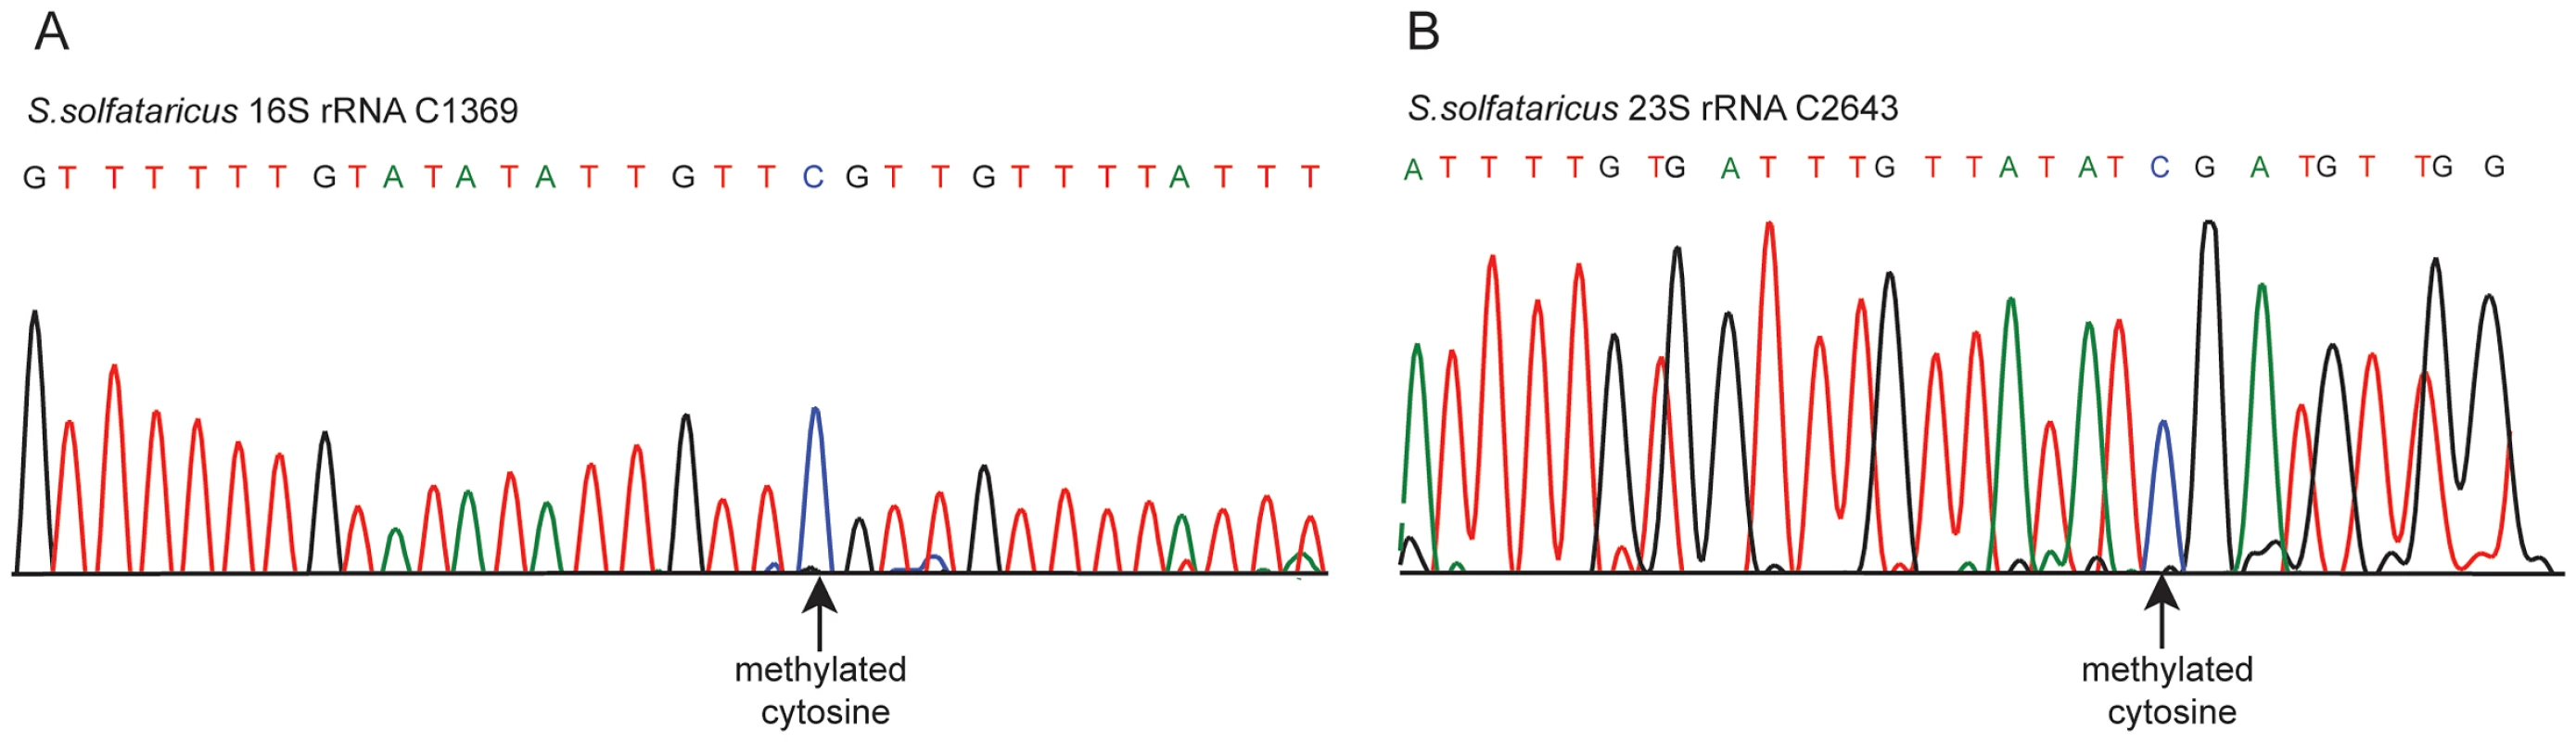 Sanger-based verification of two novel methylated positions in <i>S. solfataricus</i> rRNA identified using RNA-seq.